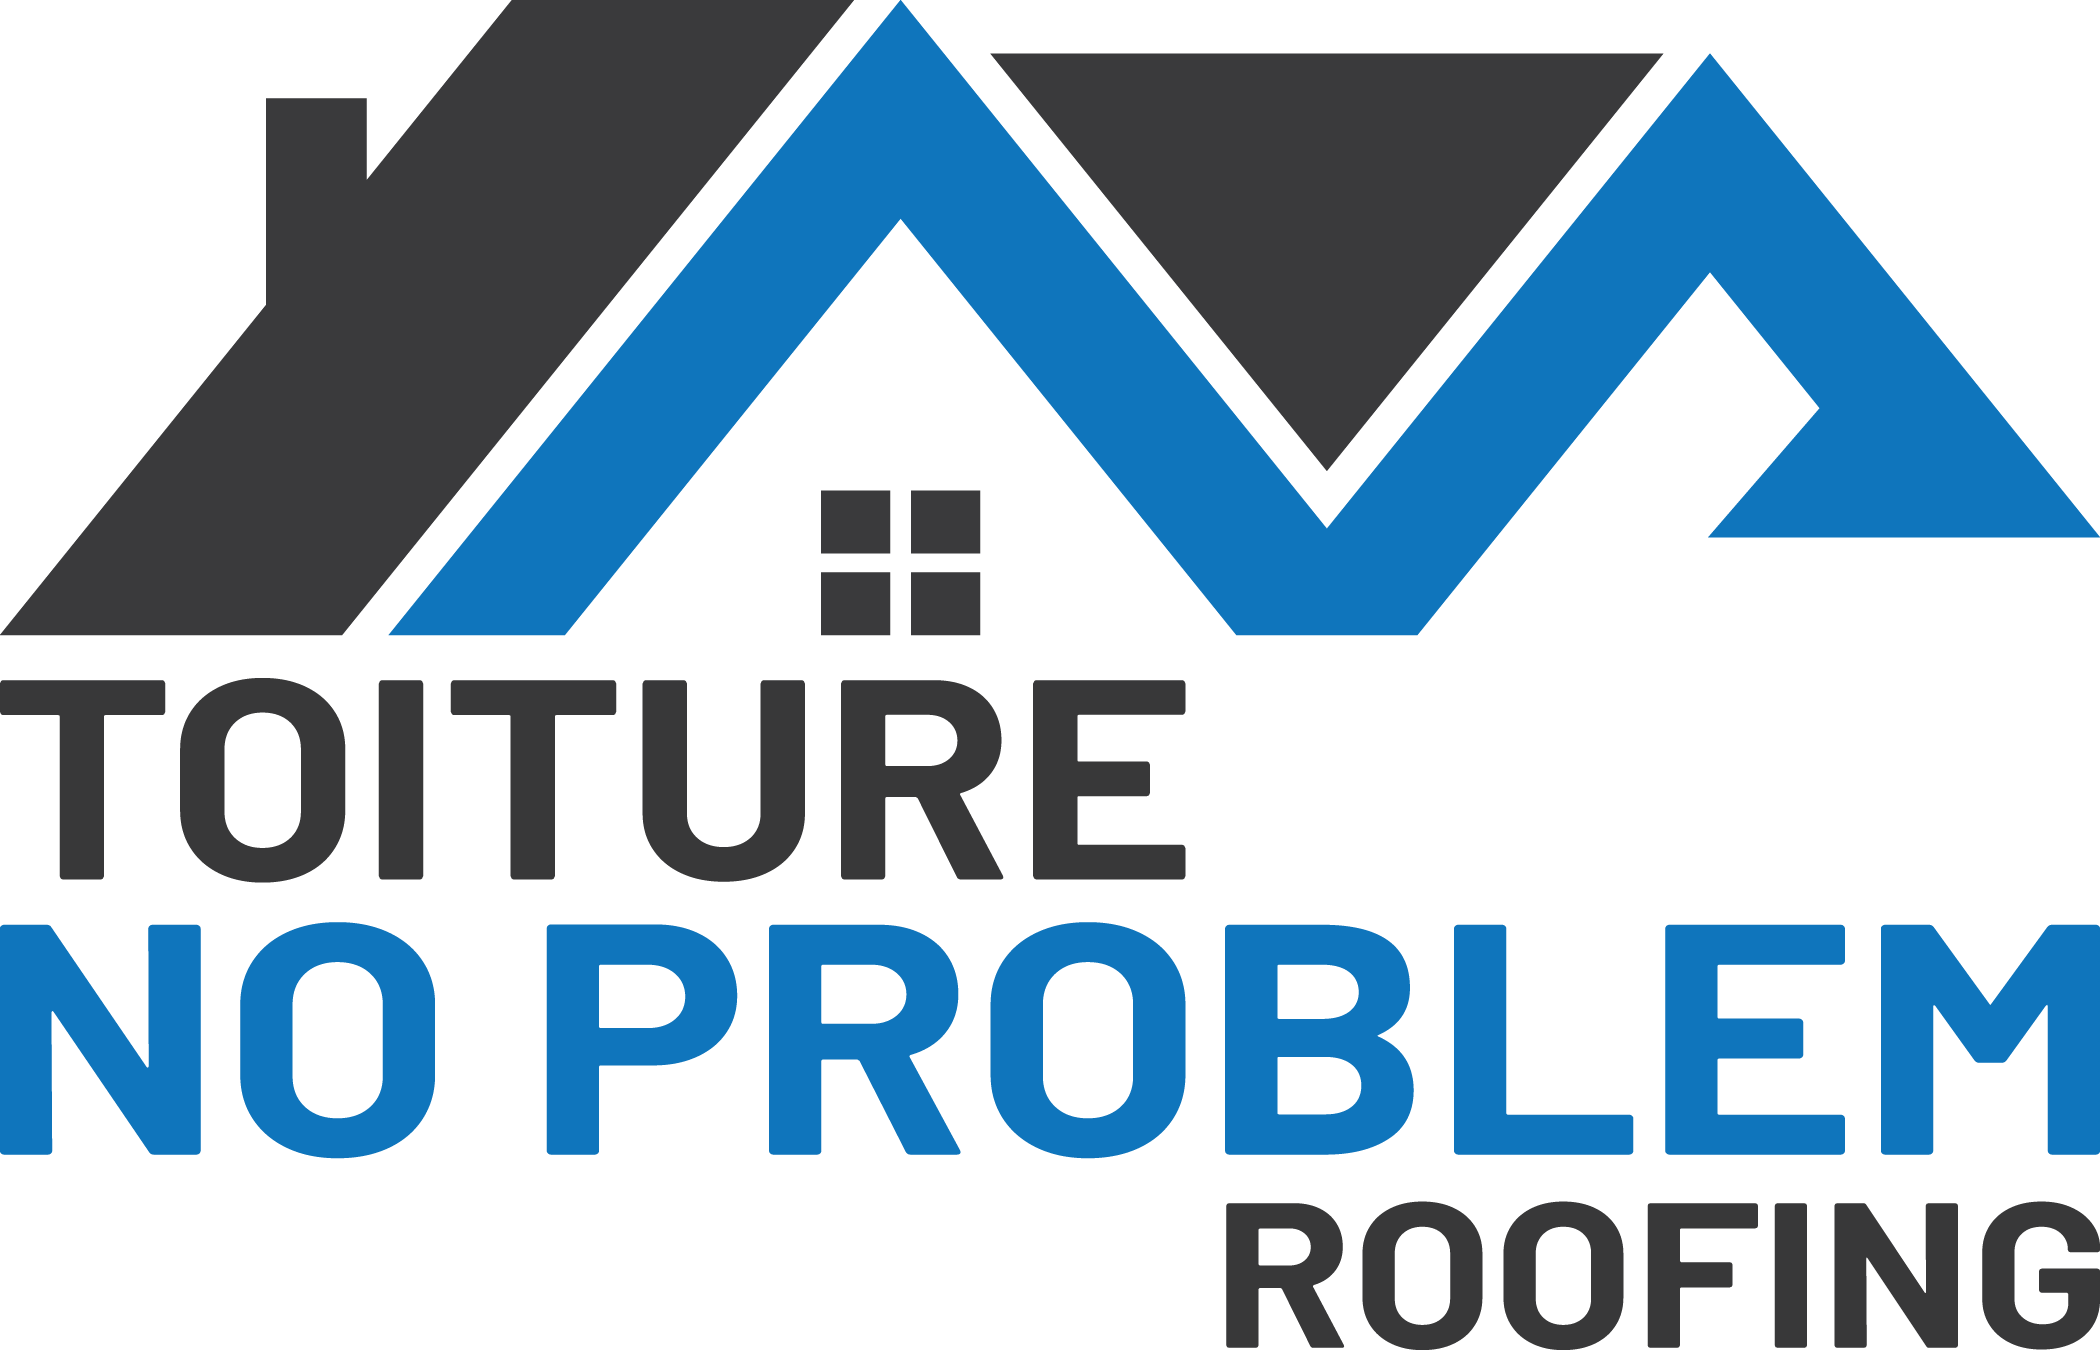 No Problem Roofing